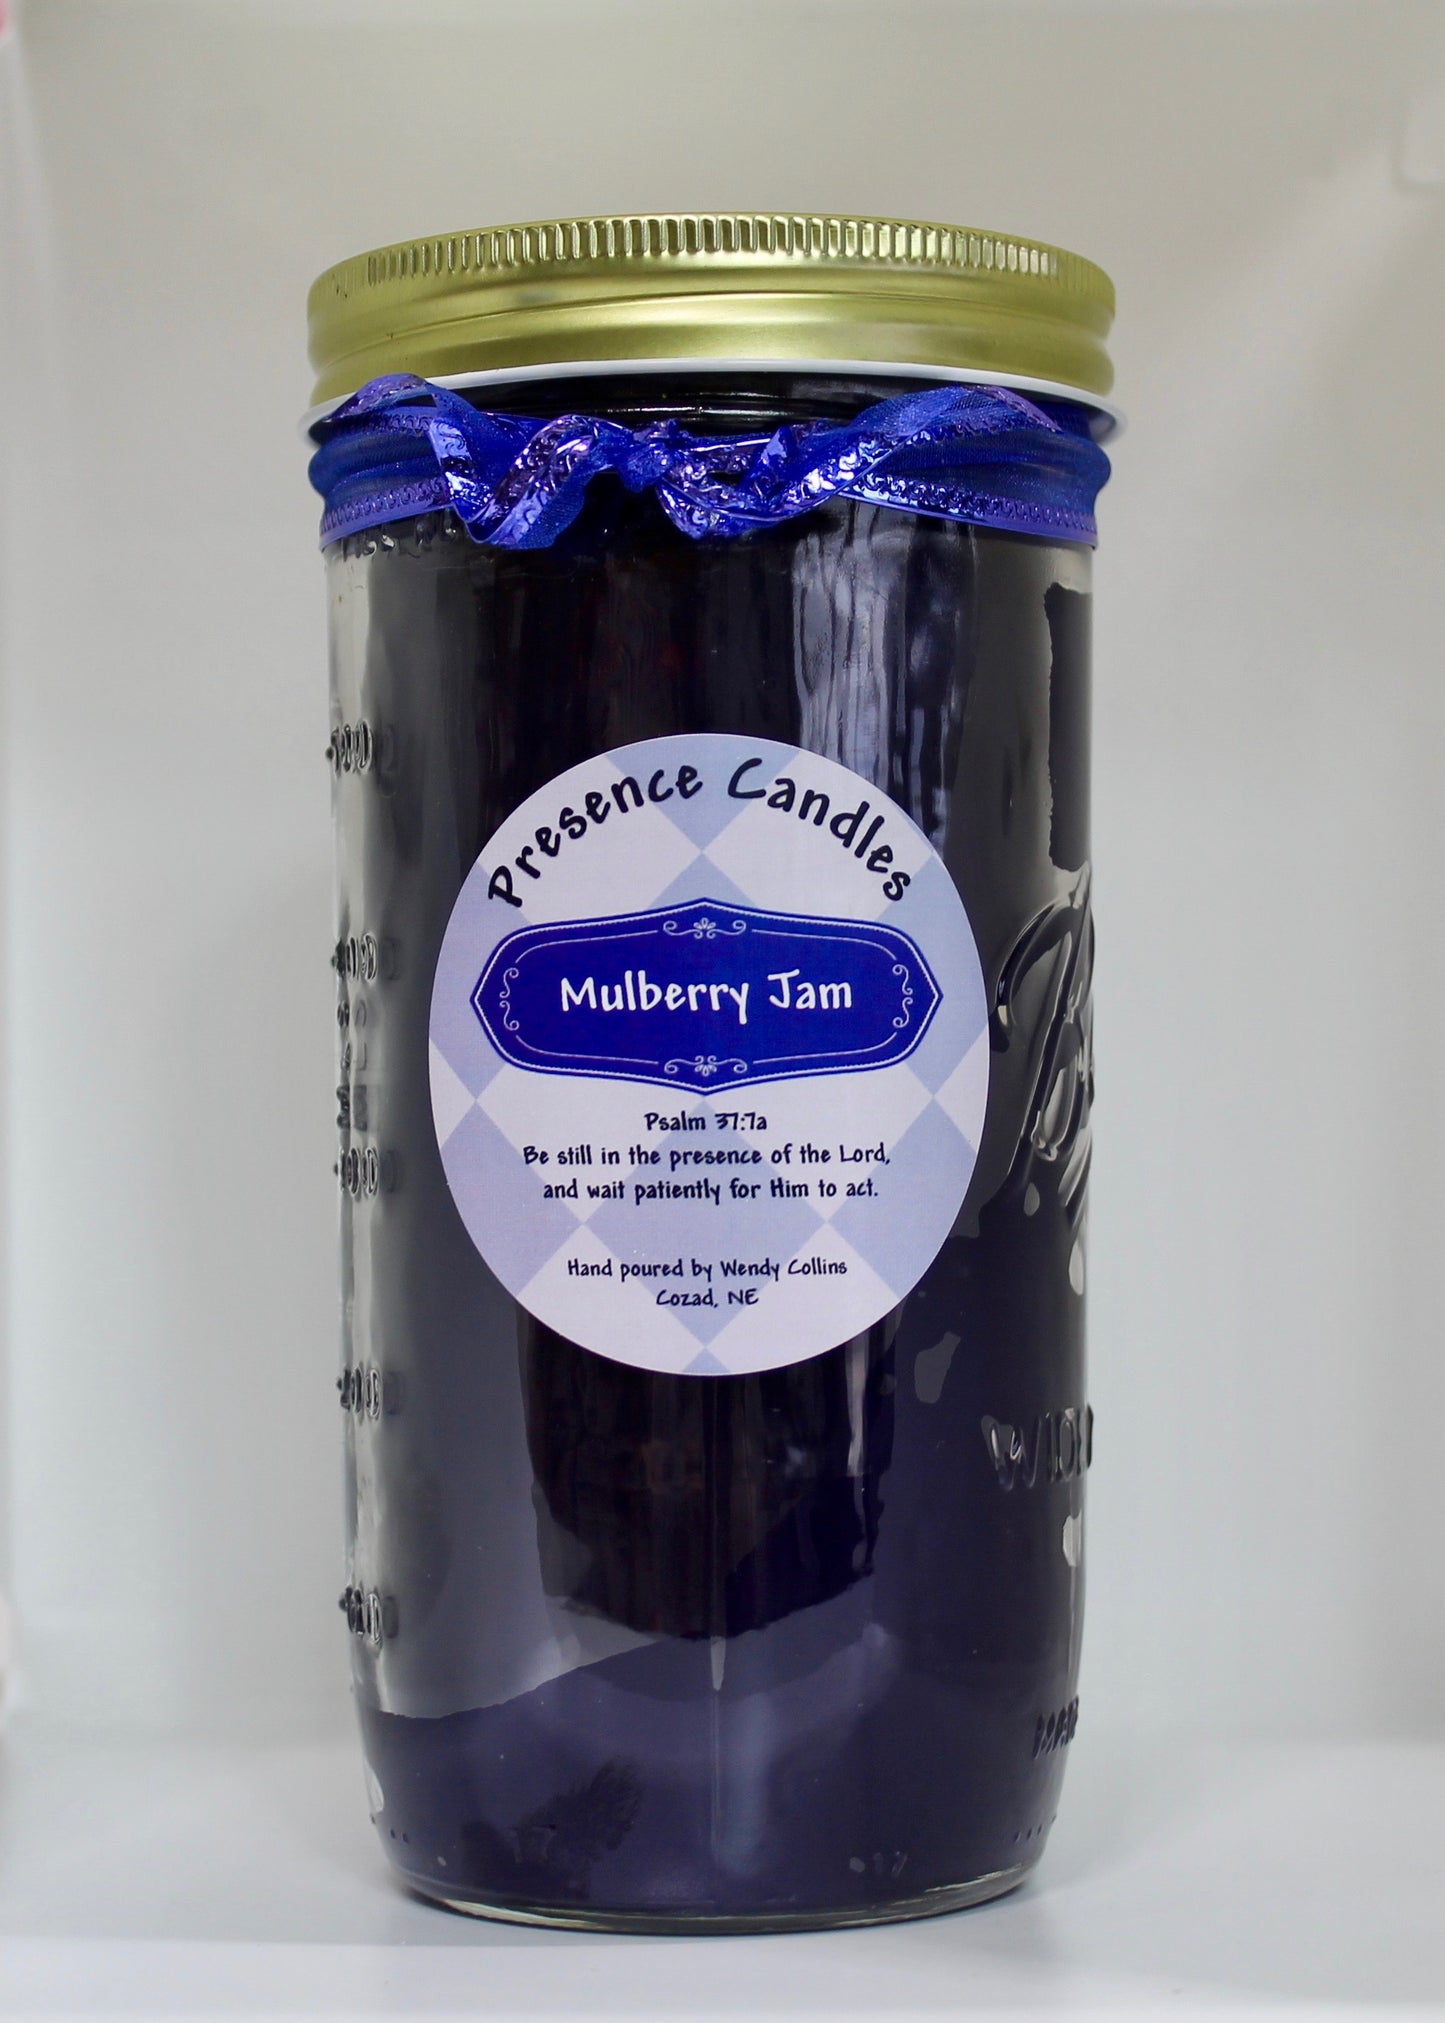 Mulberry Jam Scented Candle